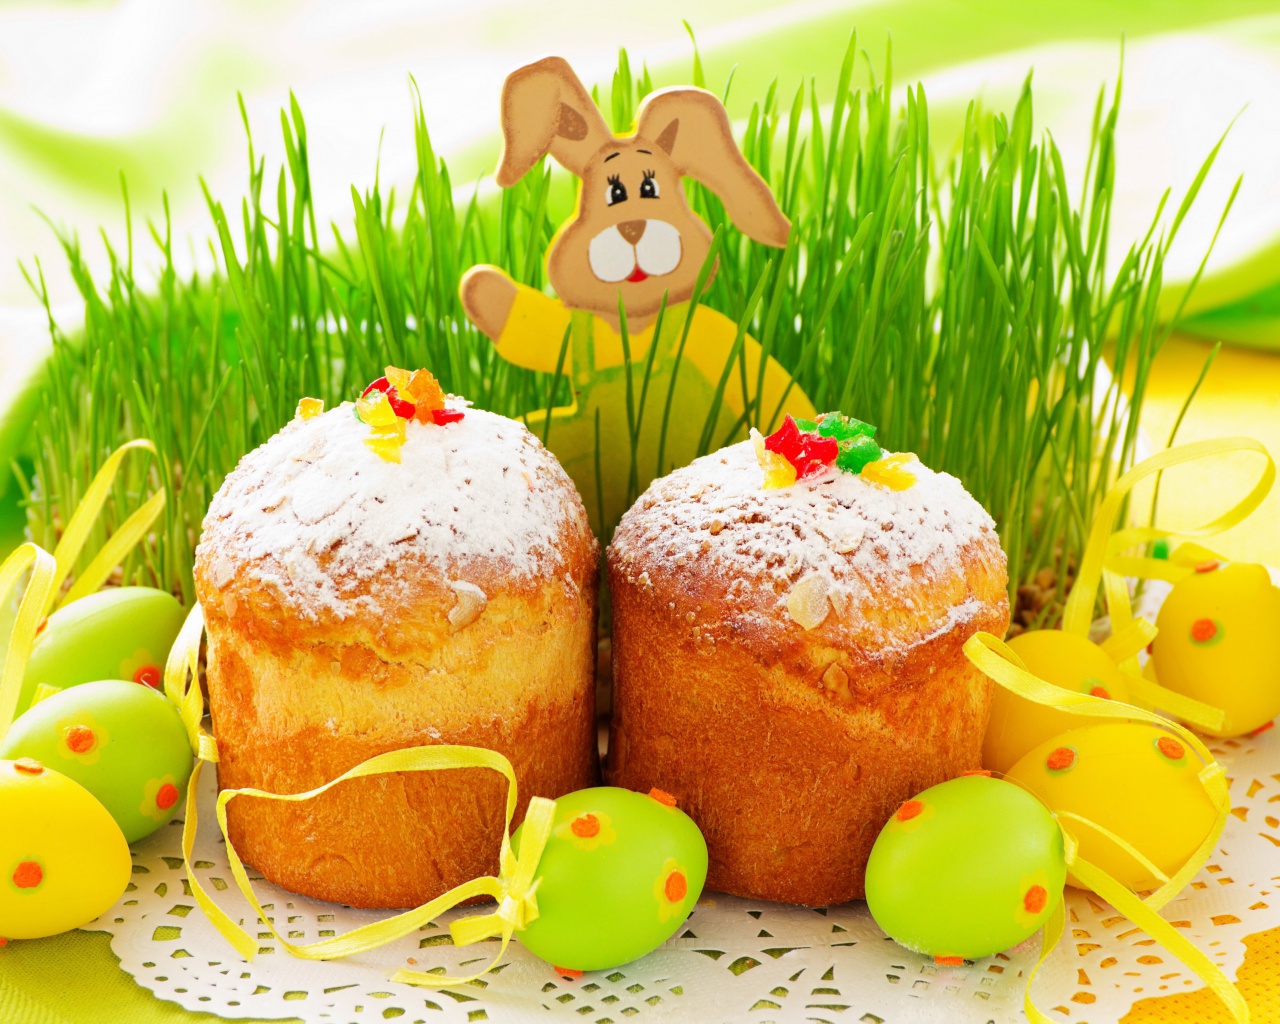 Easter Wish and Eggs wallpaper 1280x1024